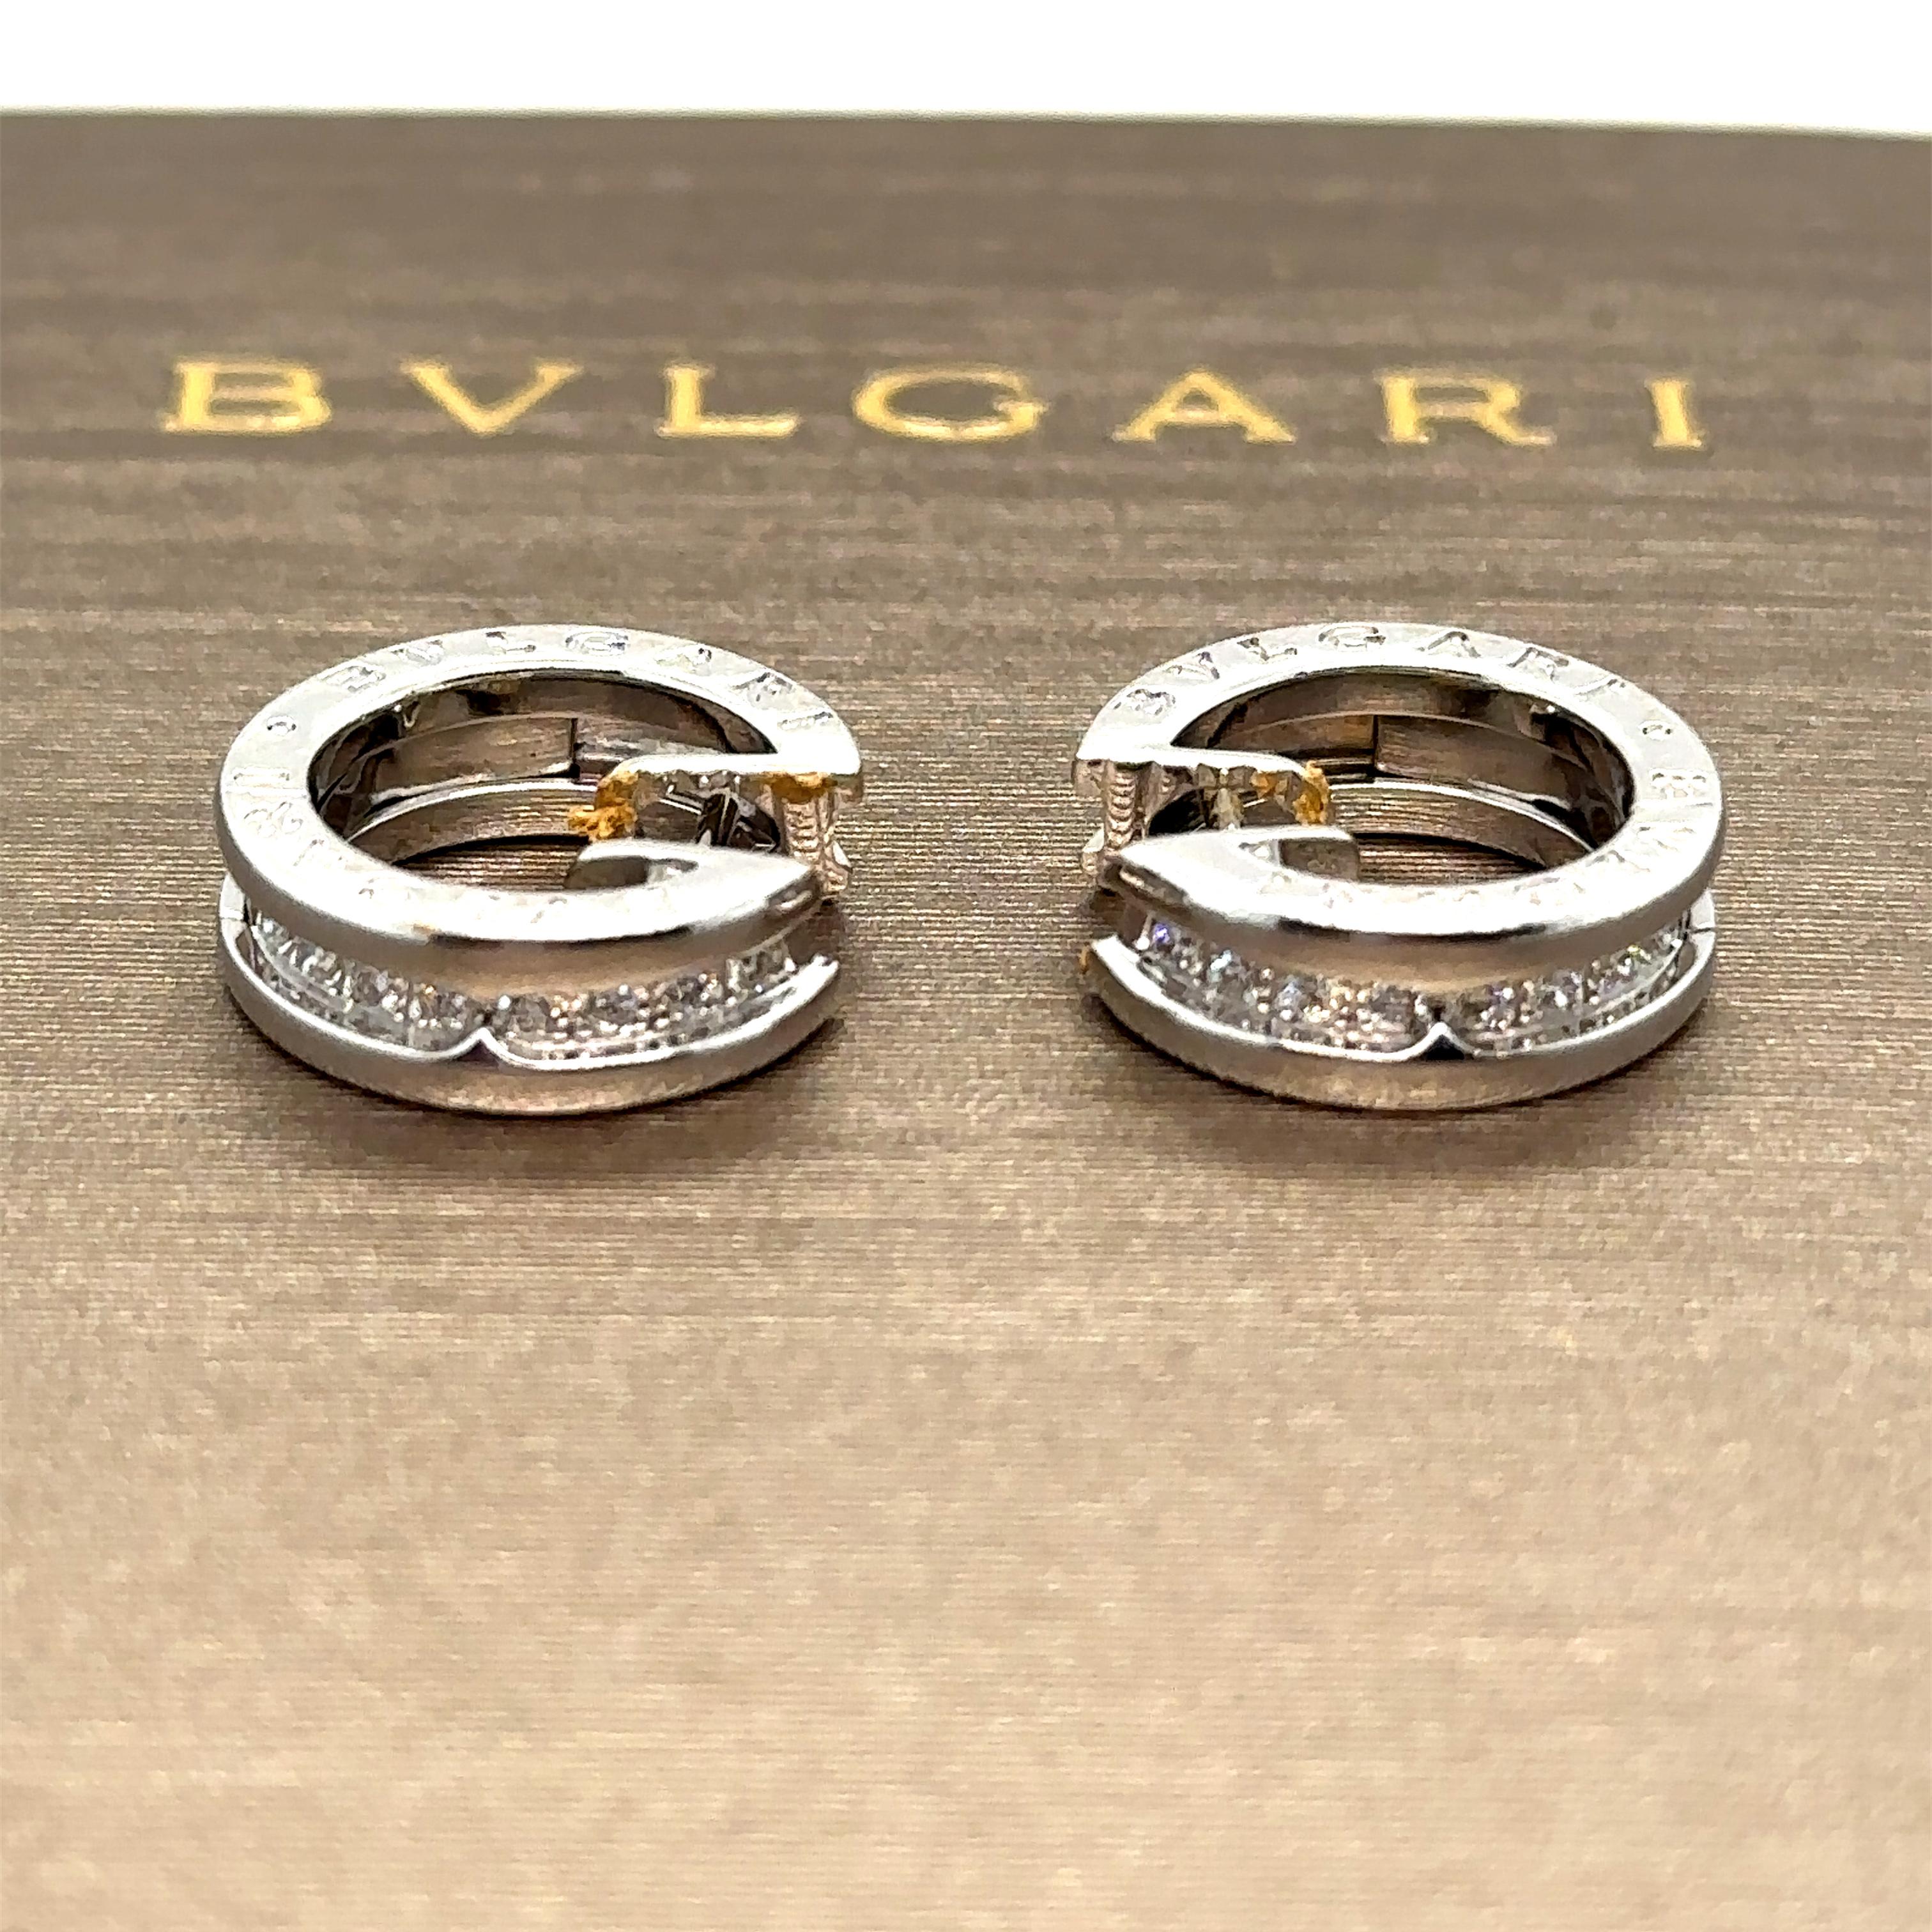 B.zero1 small hoop earrings in 18 kt white gold set with pavé diamonds on the spiral.

Metal: 18k White Gold
Carat: 0.18ct
Colour: N/A
Clarity:  N/A
Cut: Round Brilliant Cut
Weight: 9.1 grams
Engravings/Markings: N/A

Size/Measurement: N/A

Current